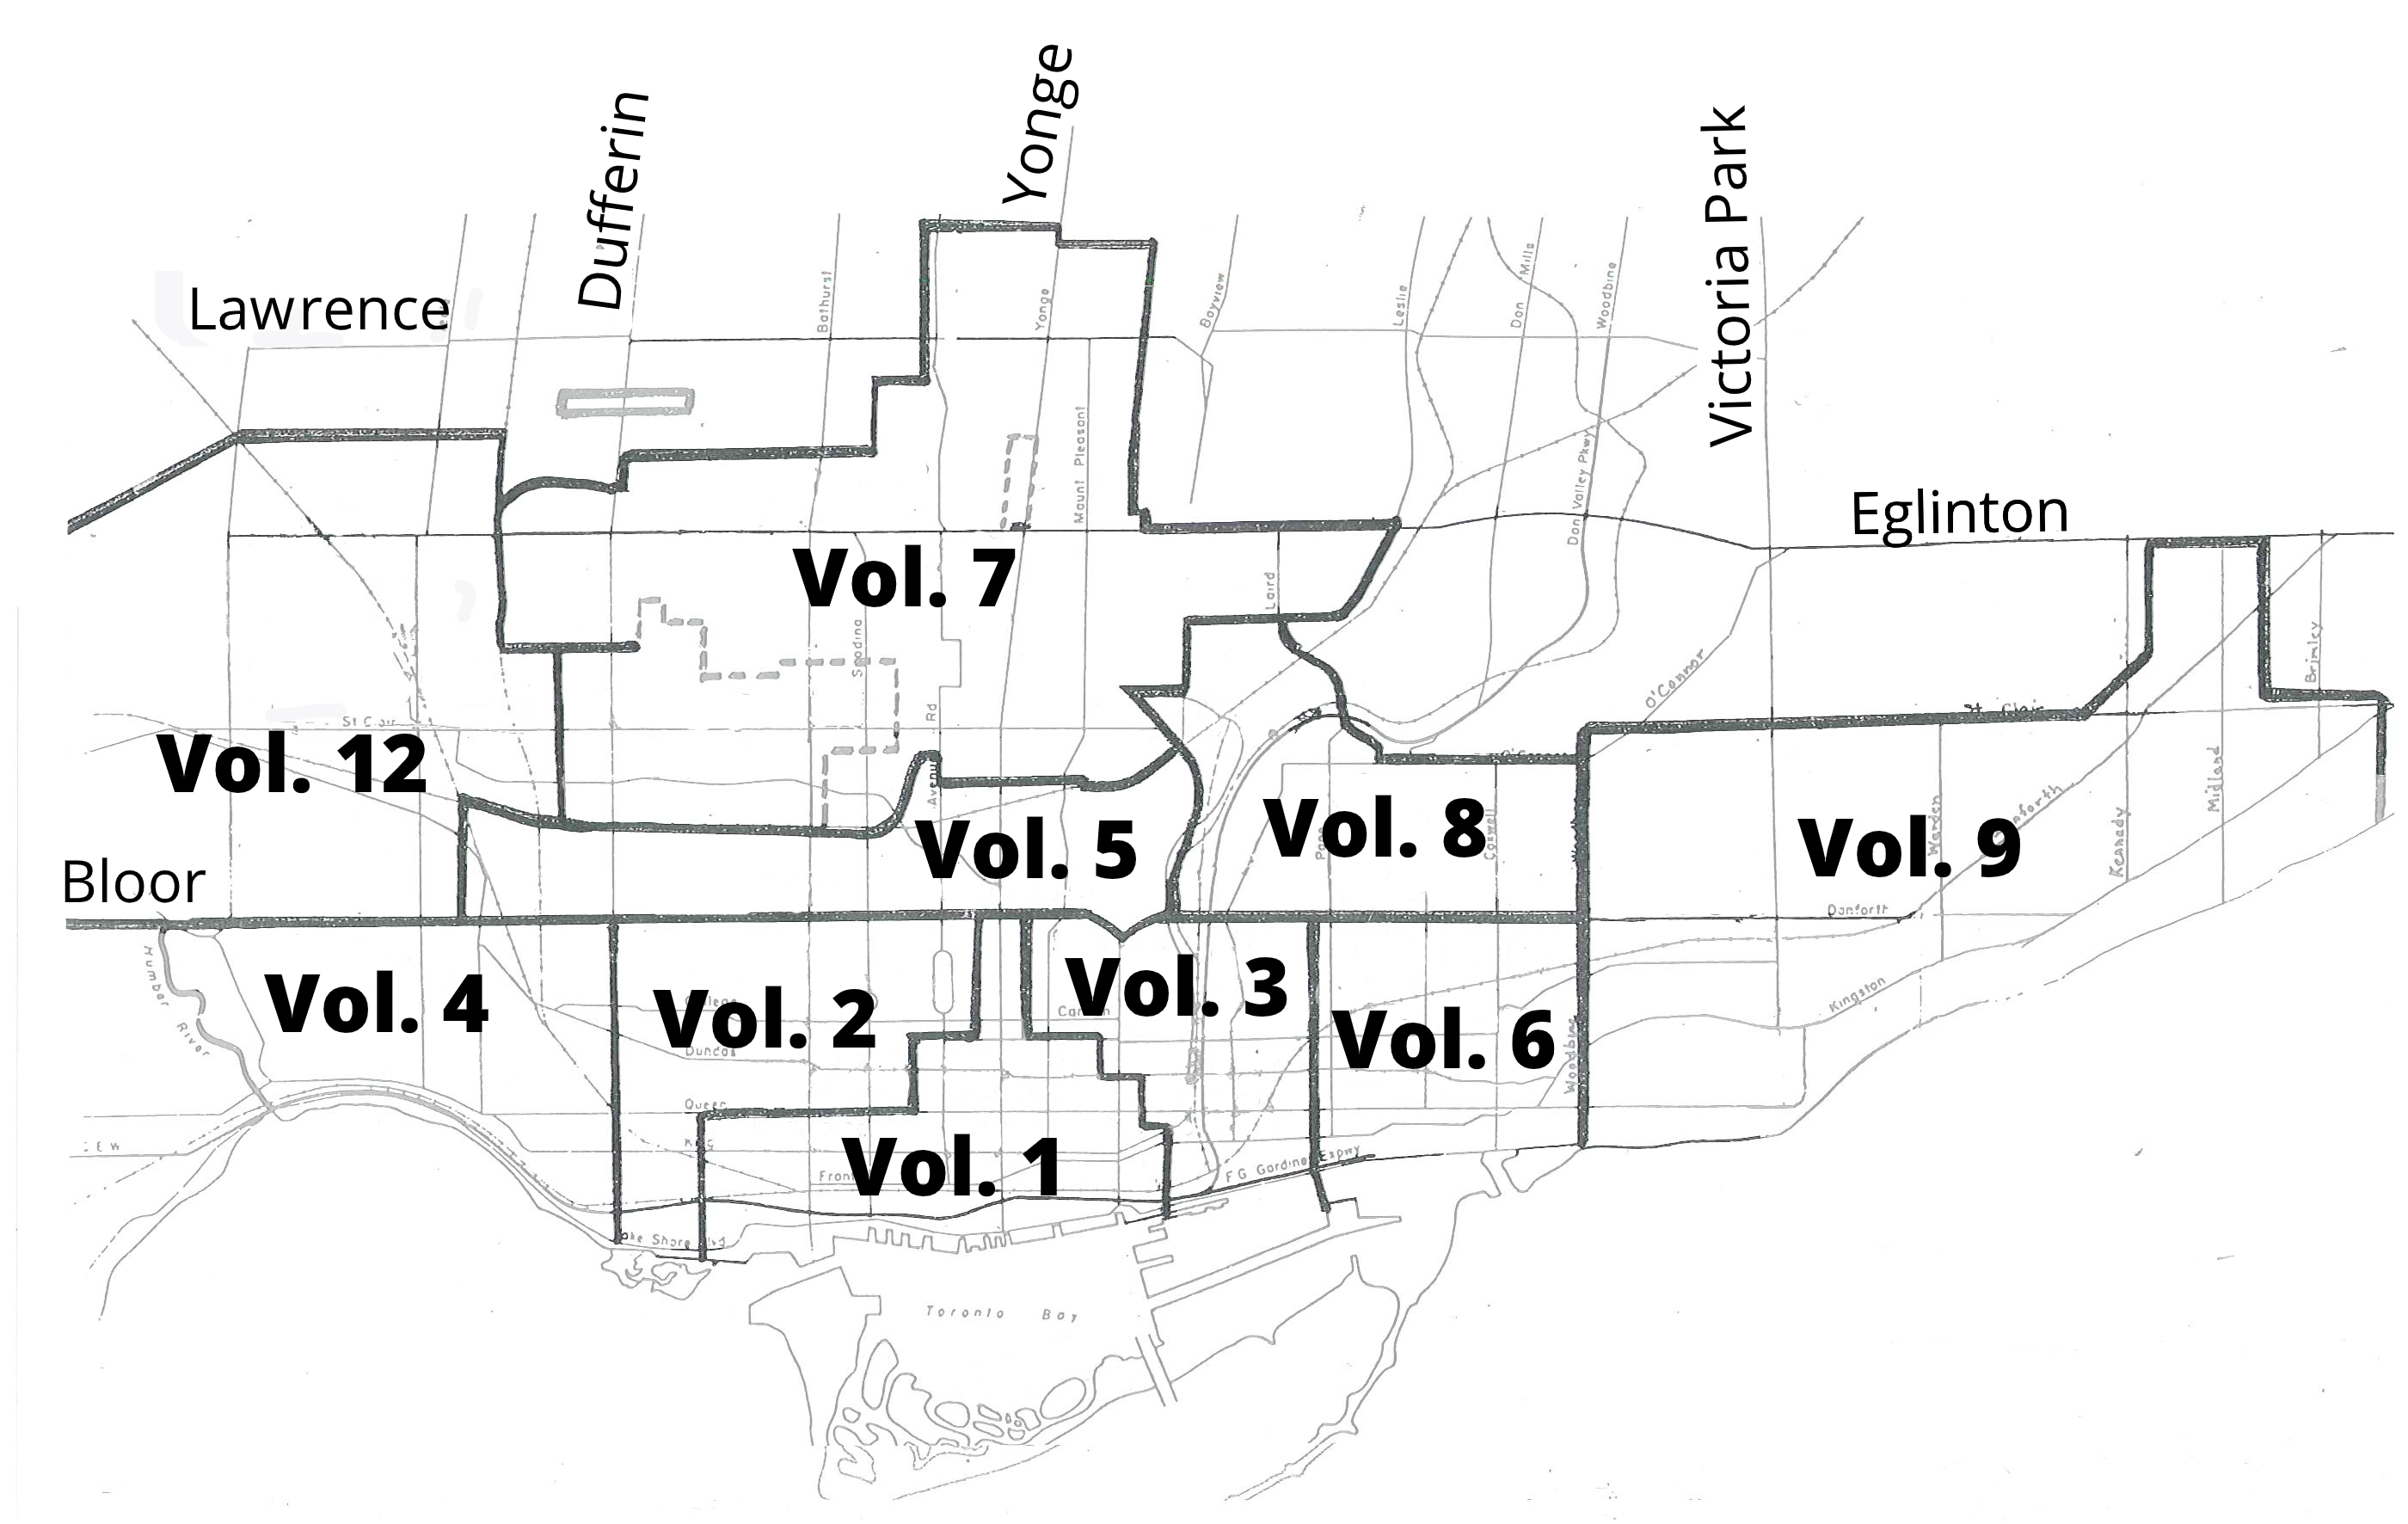 Map of Toronto divided into volumes